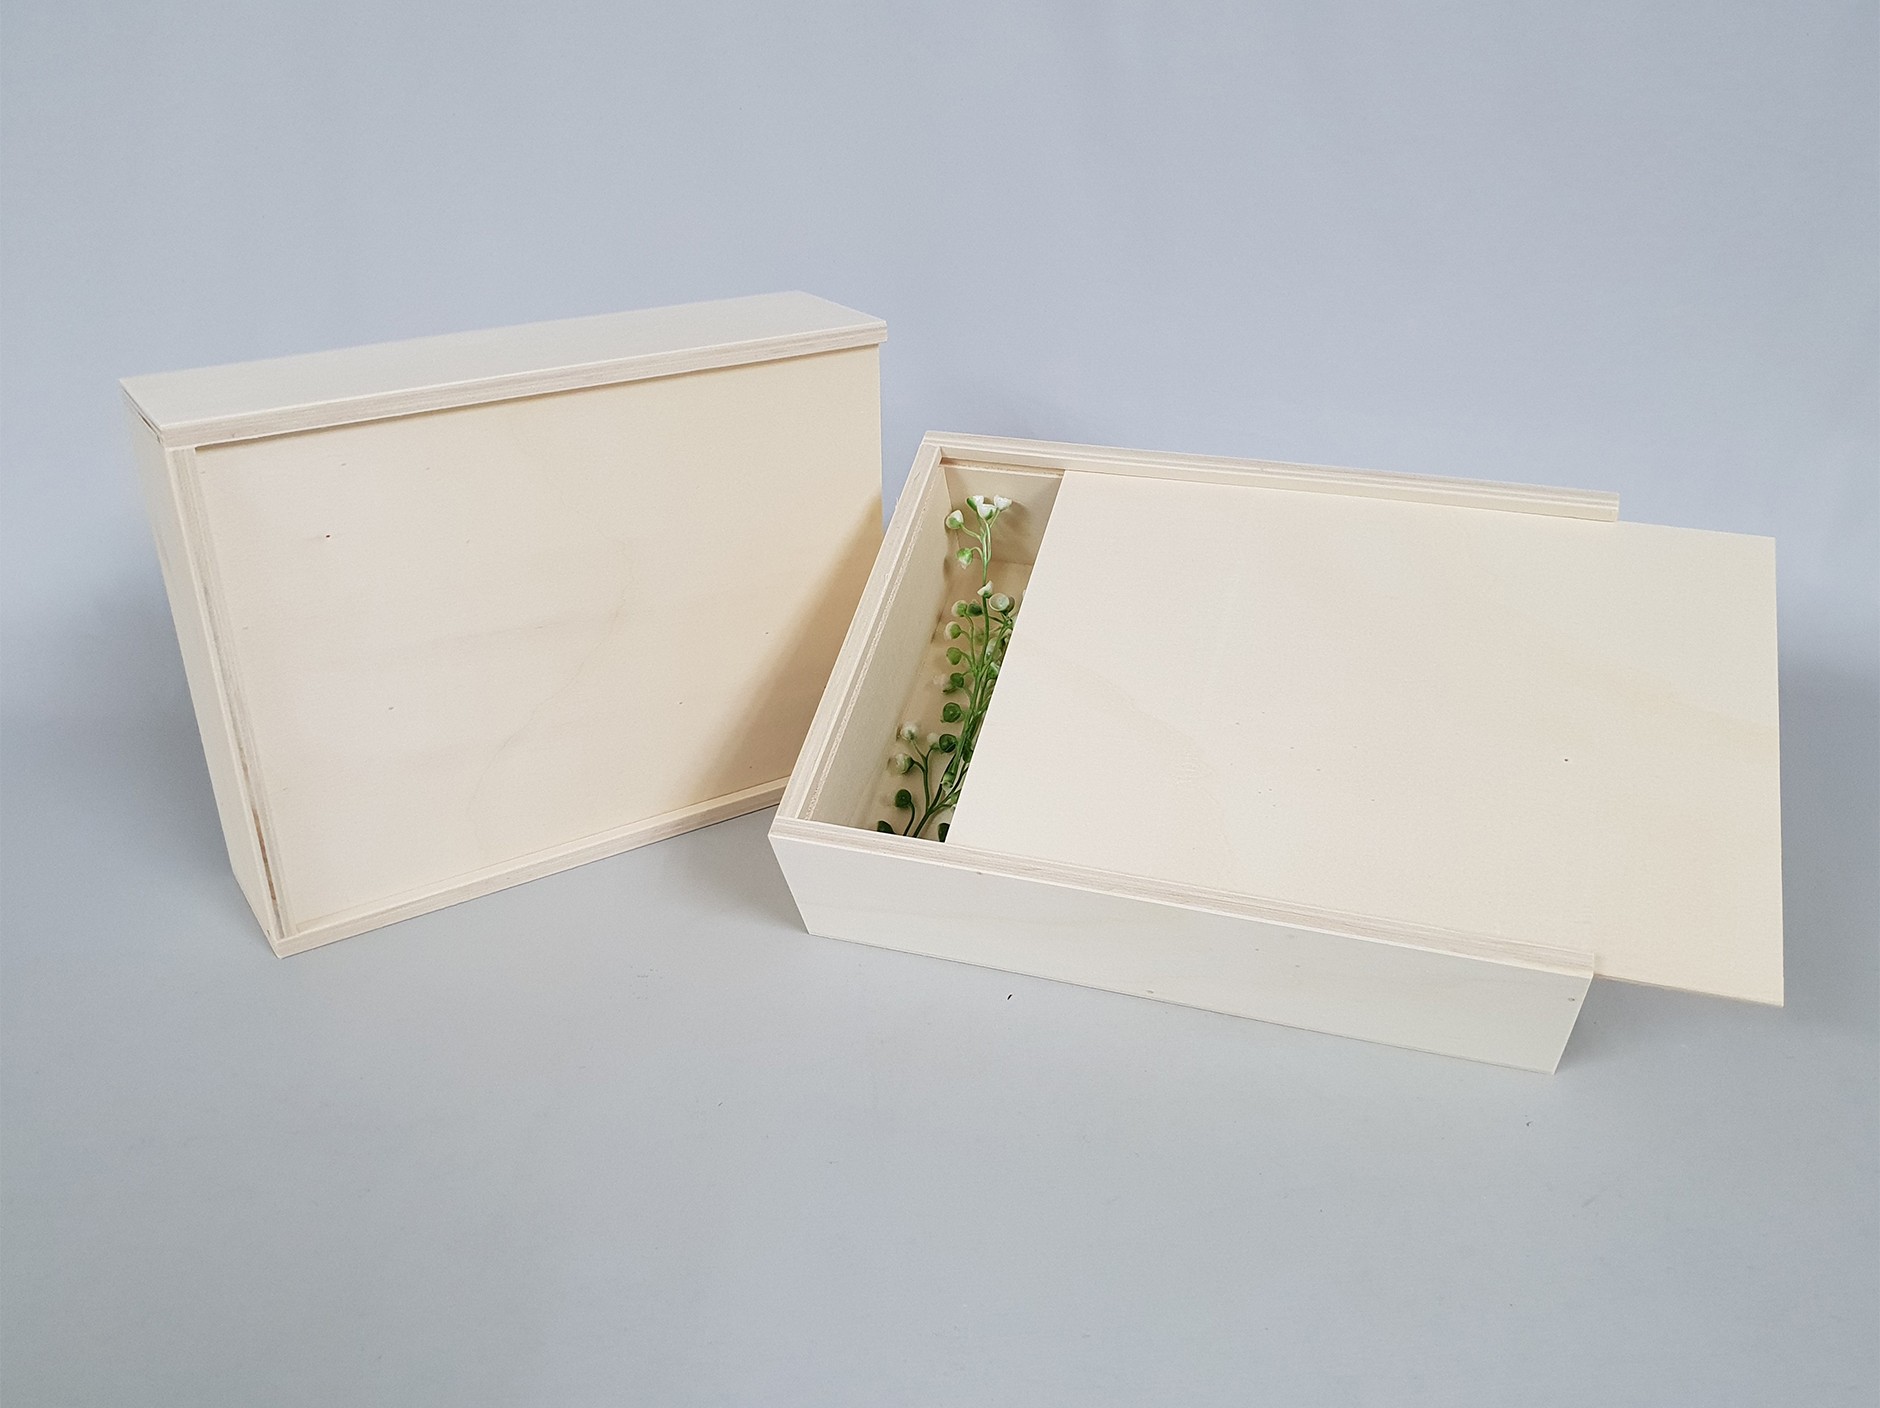 Wooden box 32x25x6 cm. with sliding cover Ref.P1454C8N